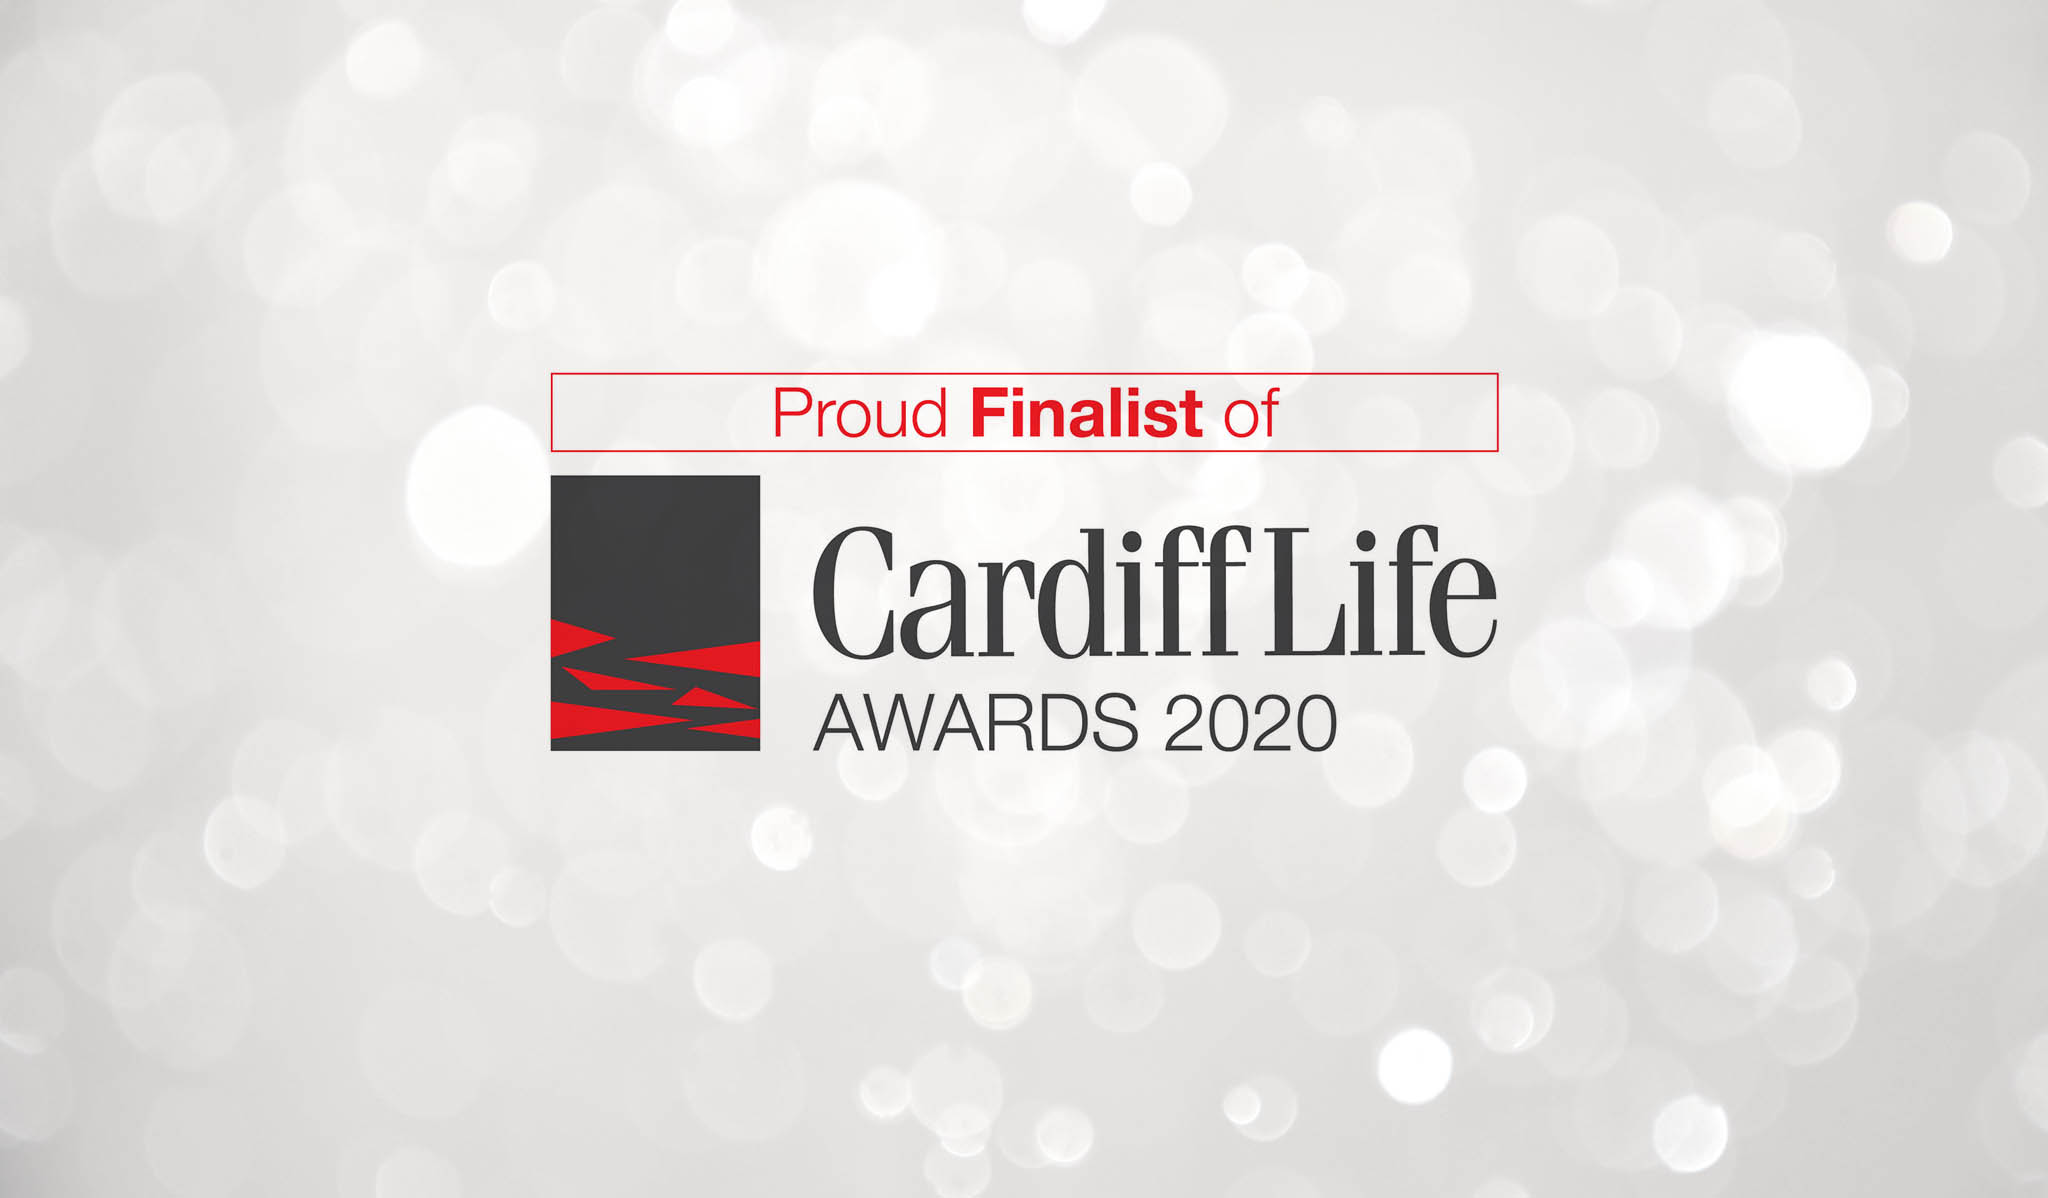 Named as Finalists at Cardiff Life Awards 2020!